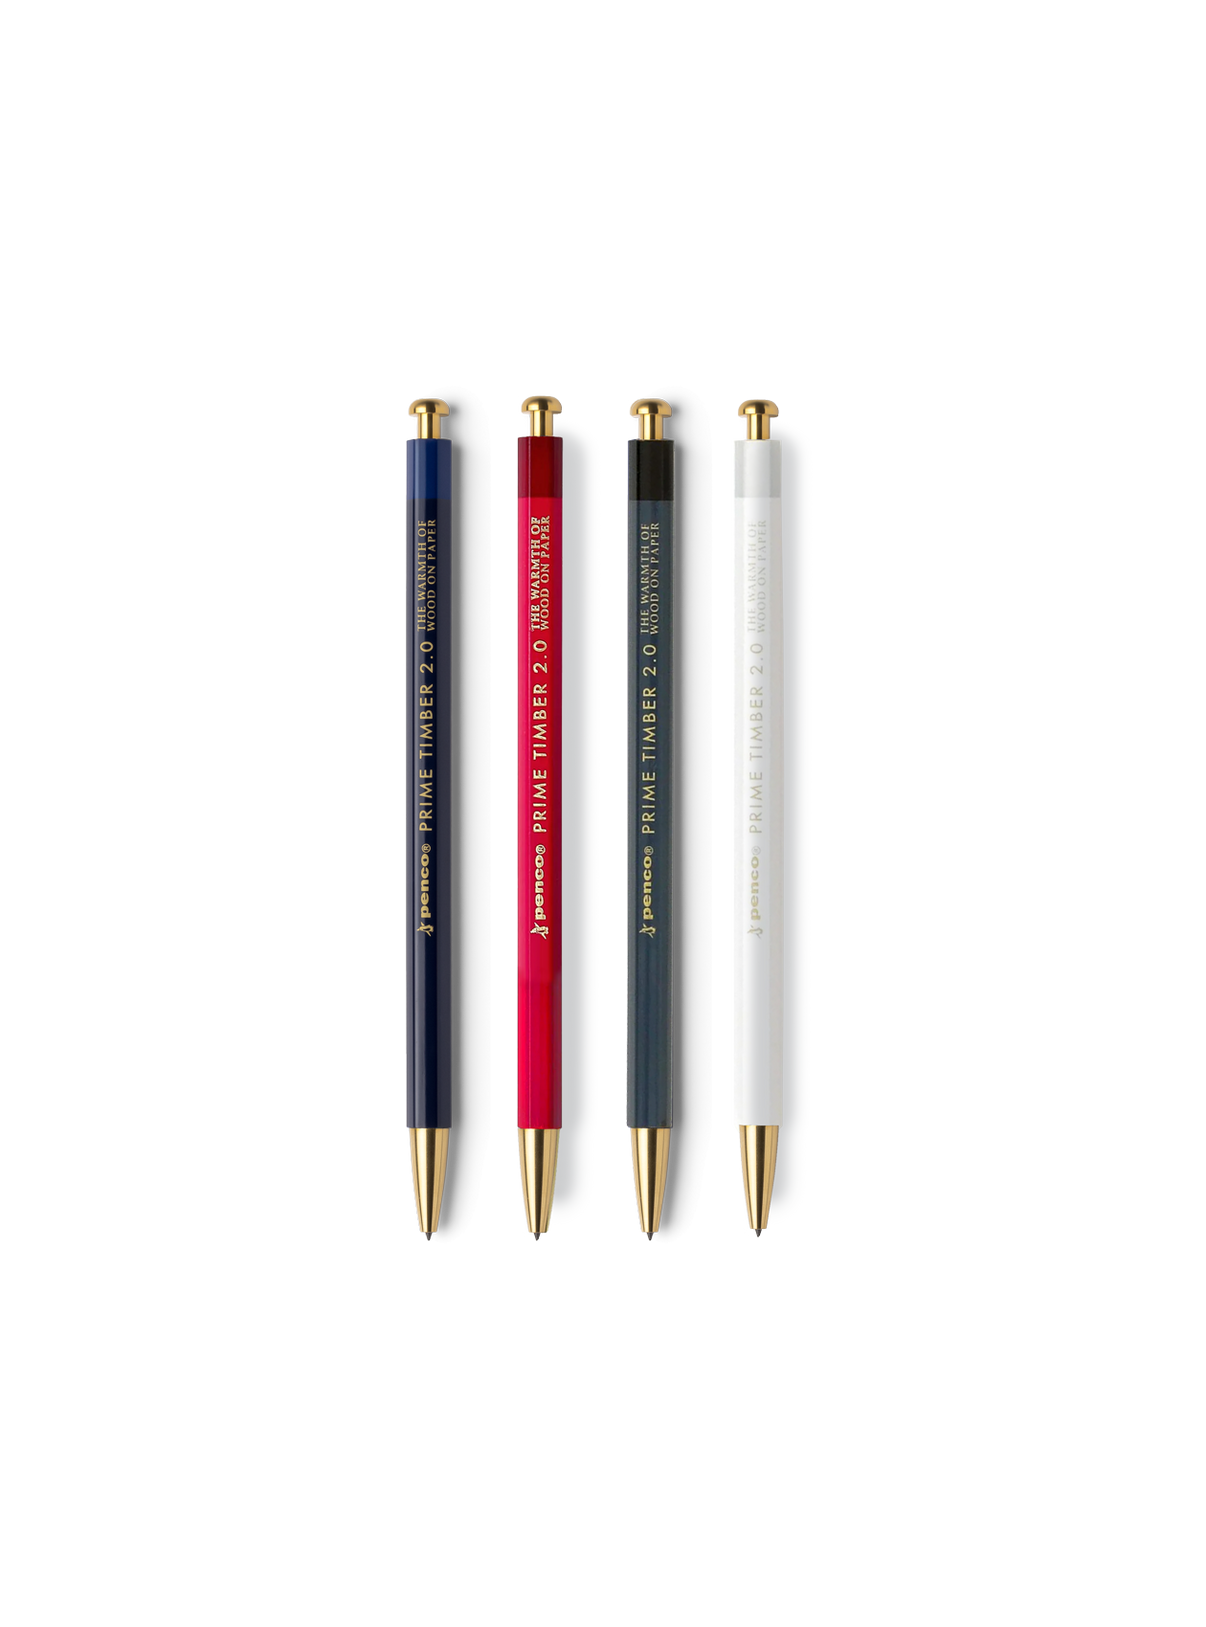 Prime Timber Brass Mechanical Pencil in Navy, Red, Black and White